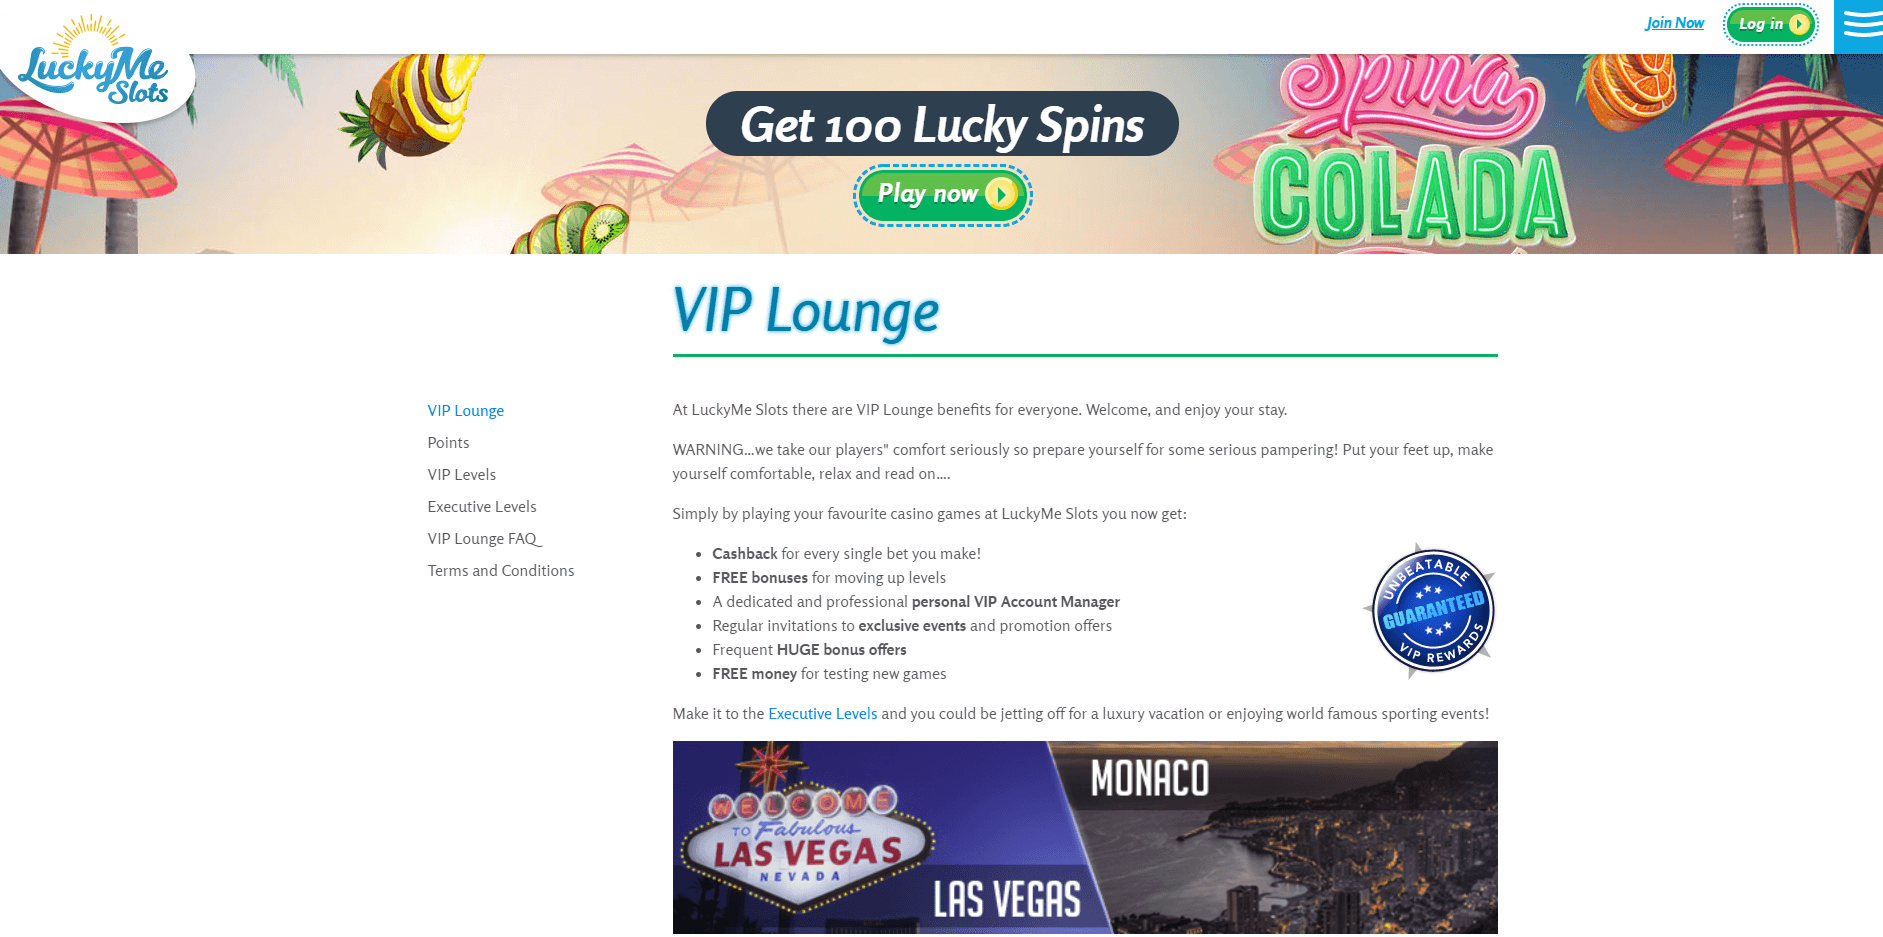 Lucky me slots coupon codes